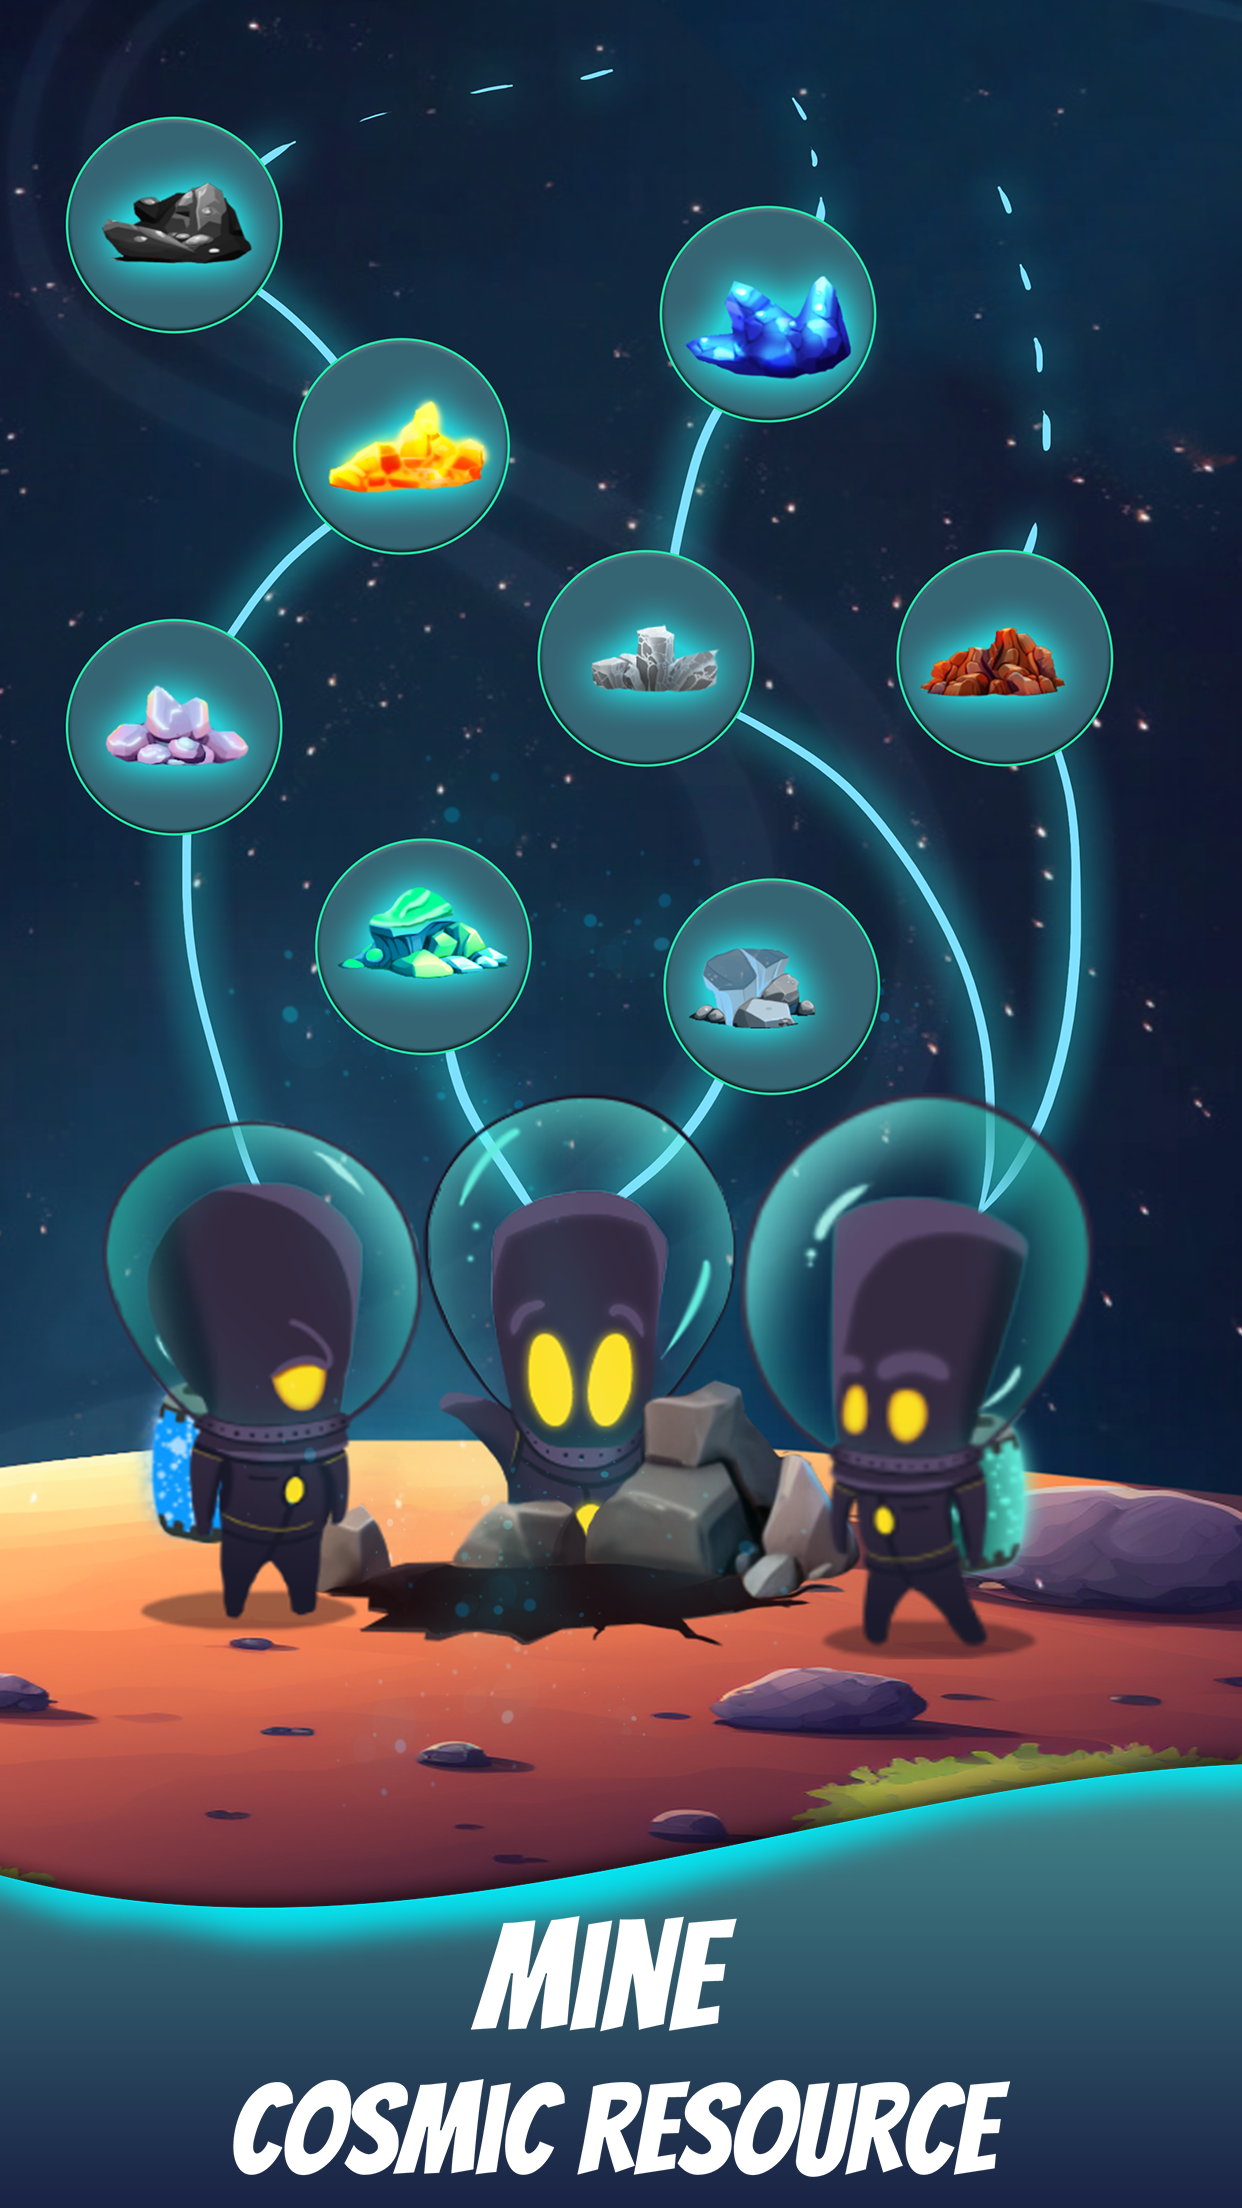 Screenshot of Space eXo Colony - Idle Tycoon